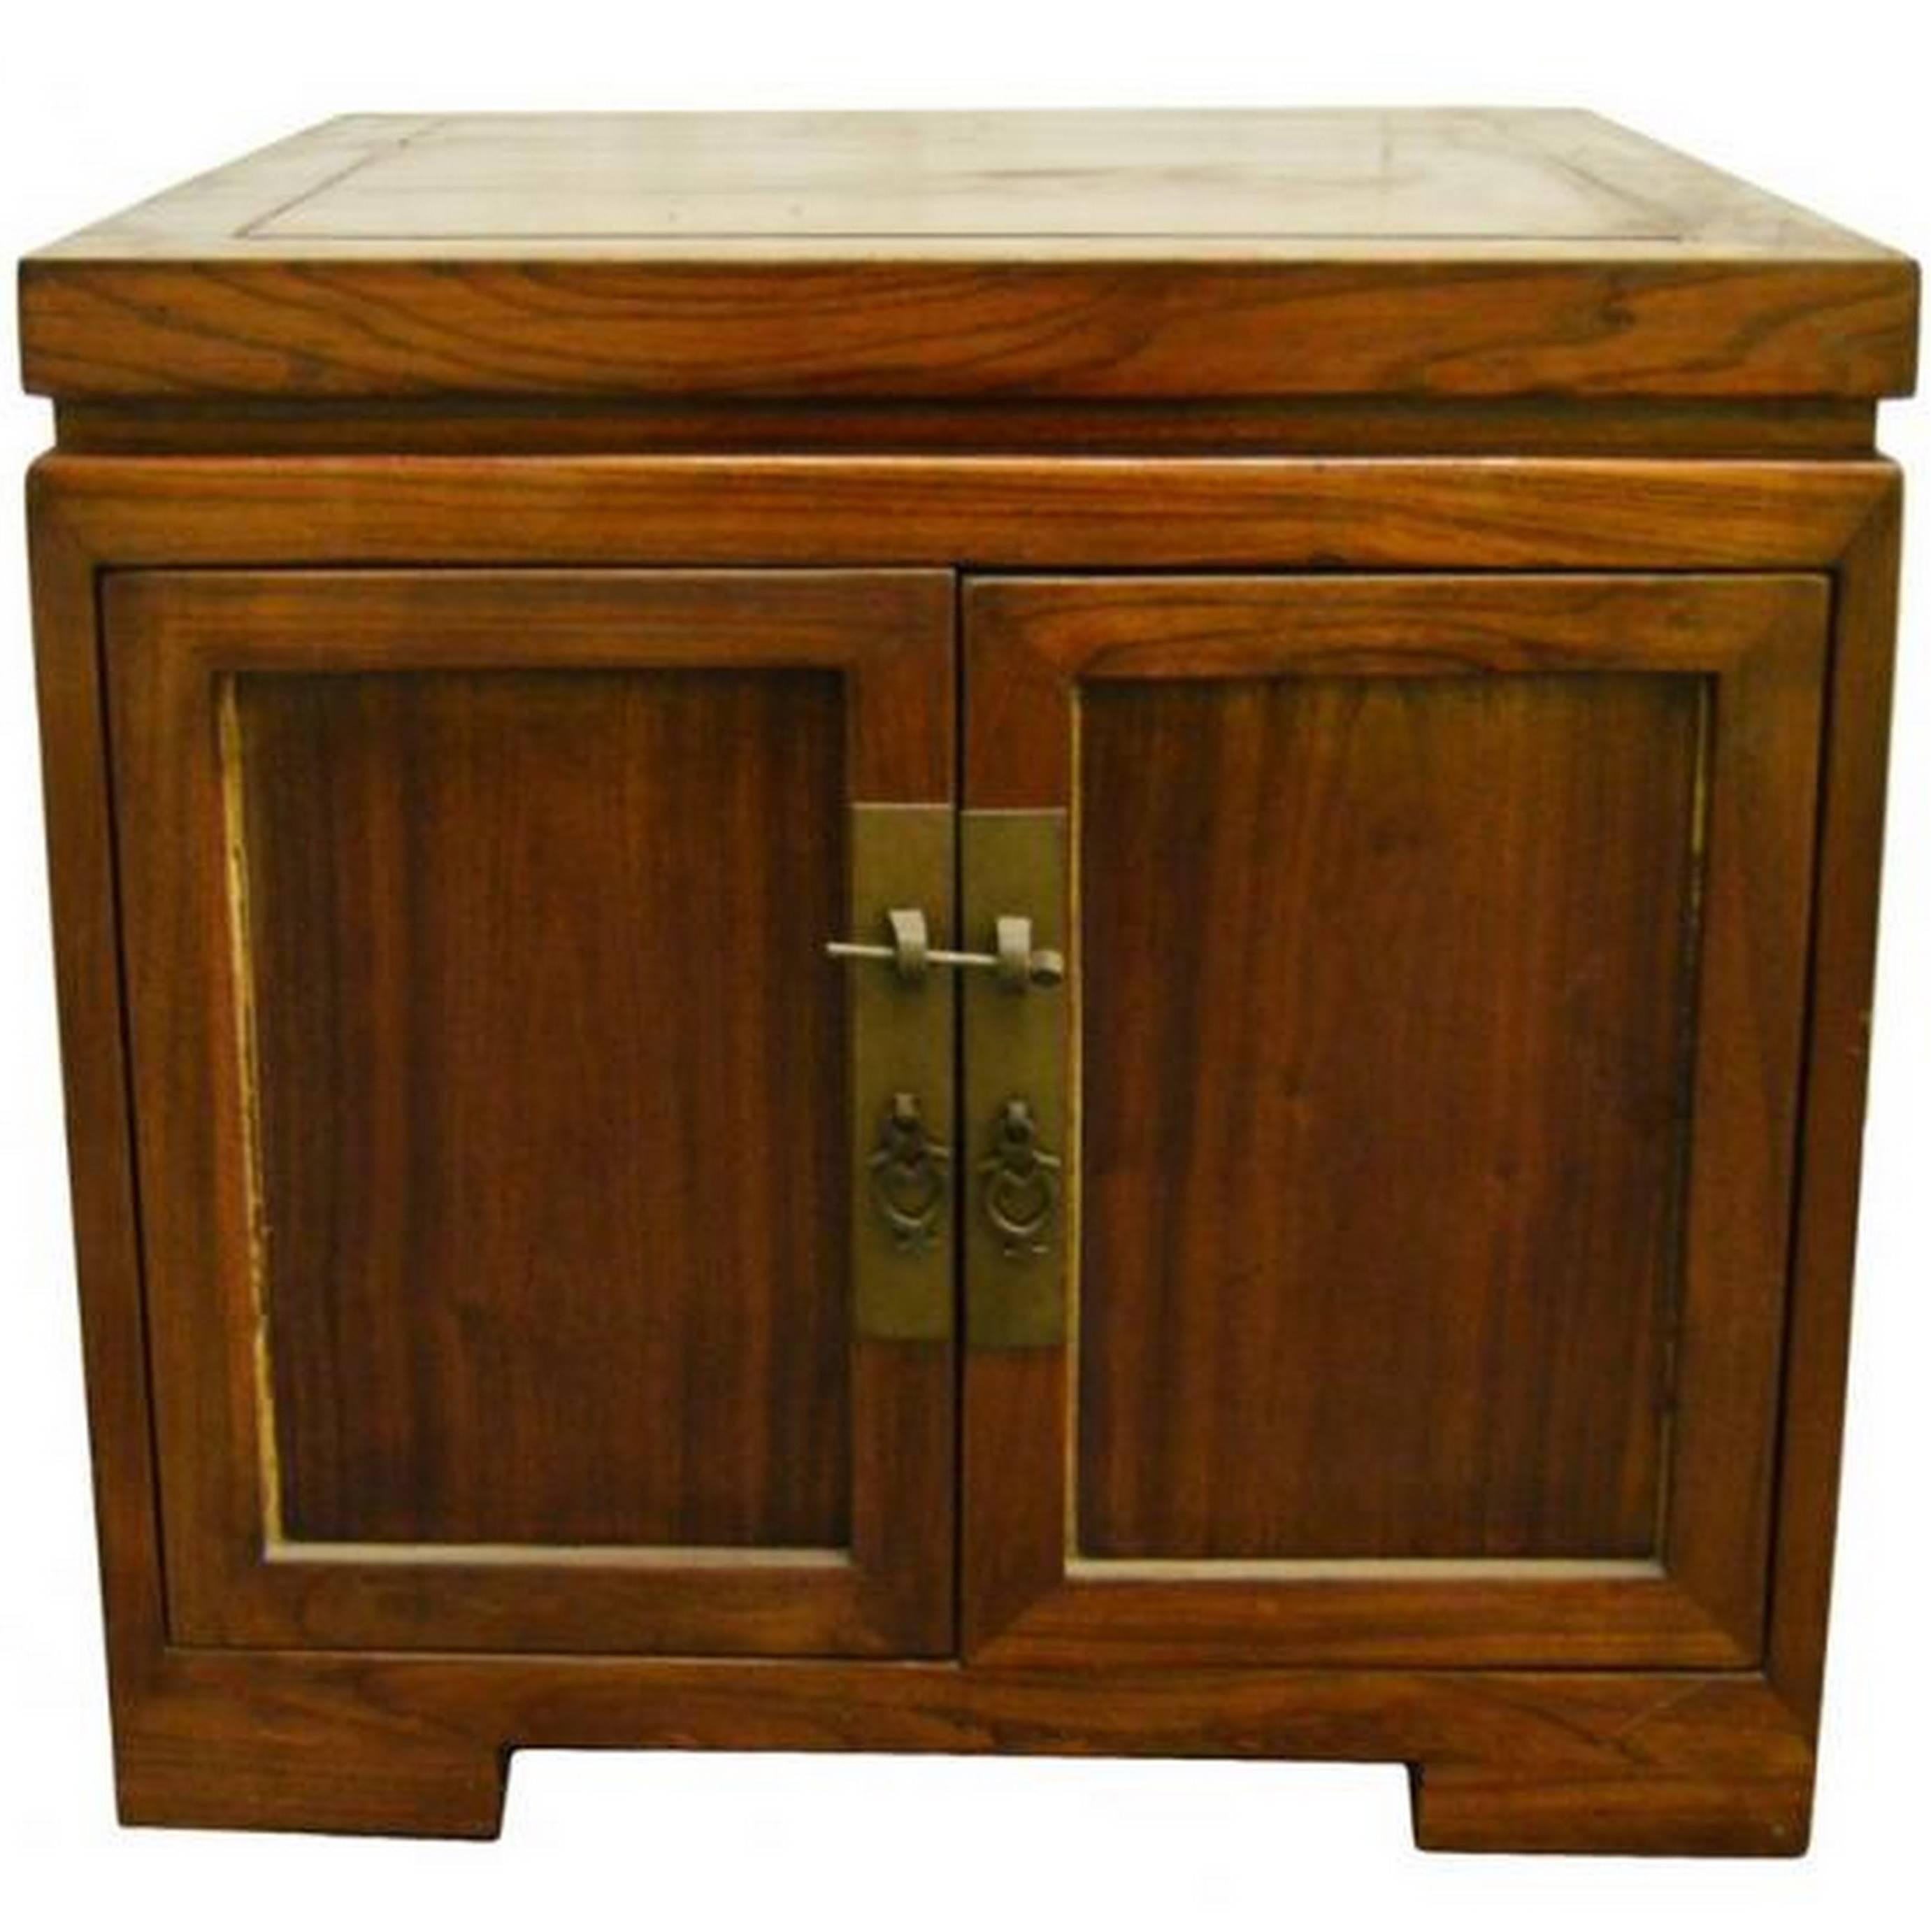 Antique Chinese Brown Lacquered Bedside Cabinet with Brass Hardware, circa 1900